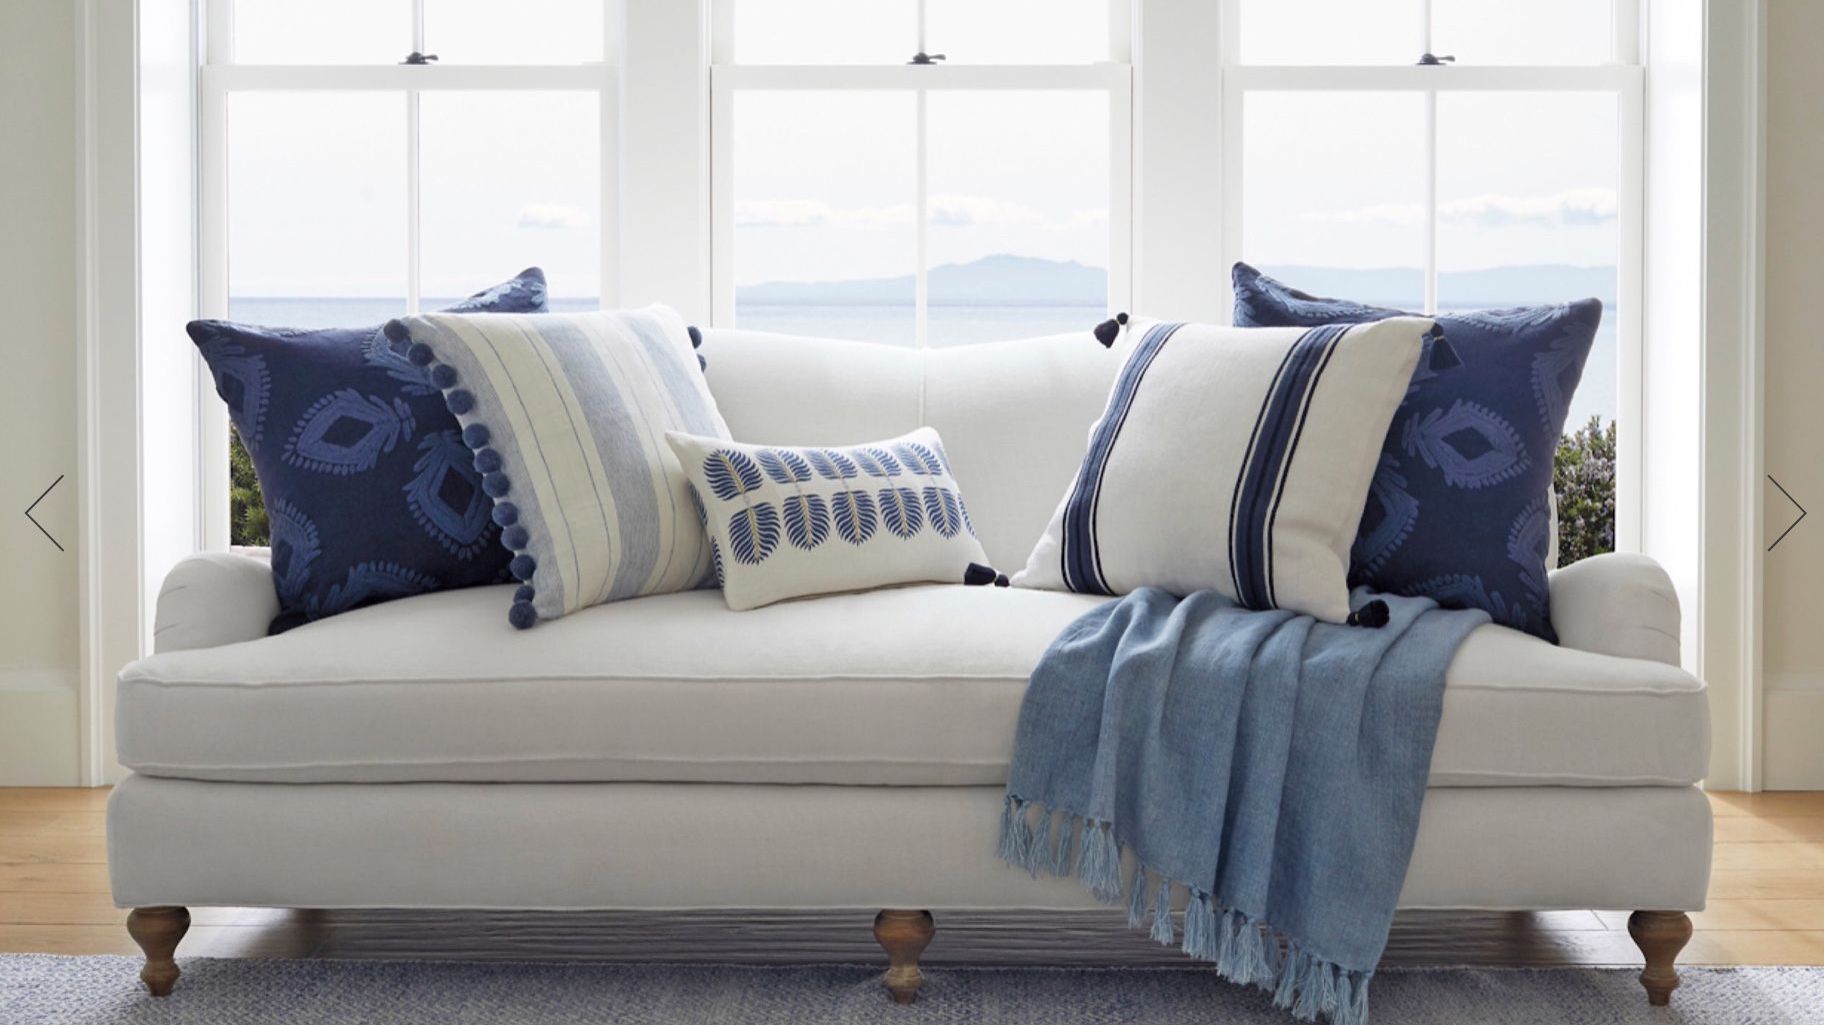 What Pillow Color Will Match A White Couch